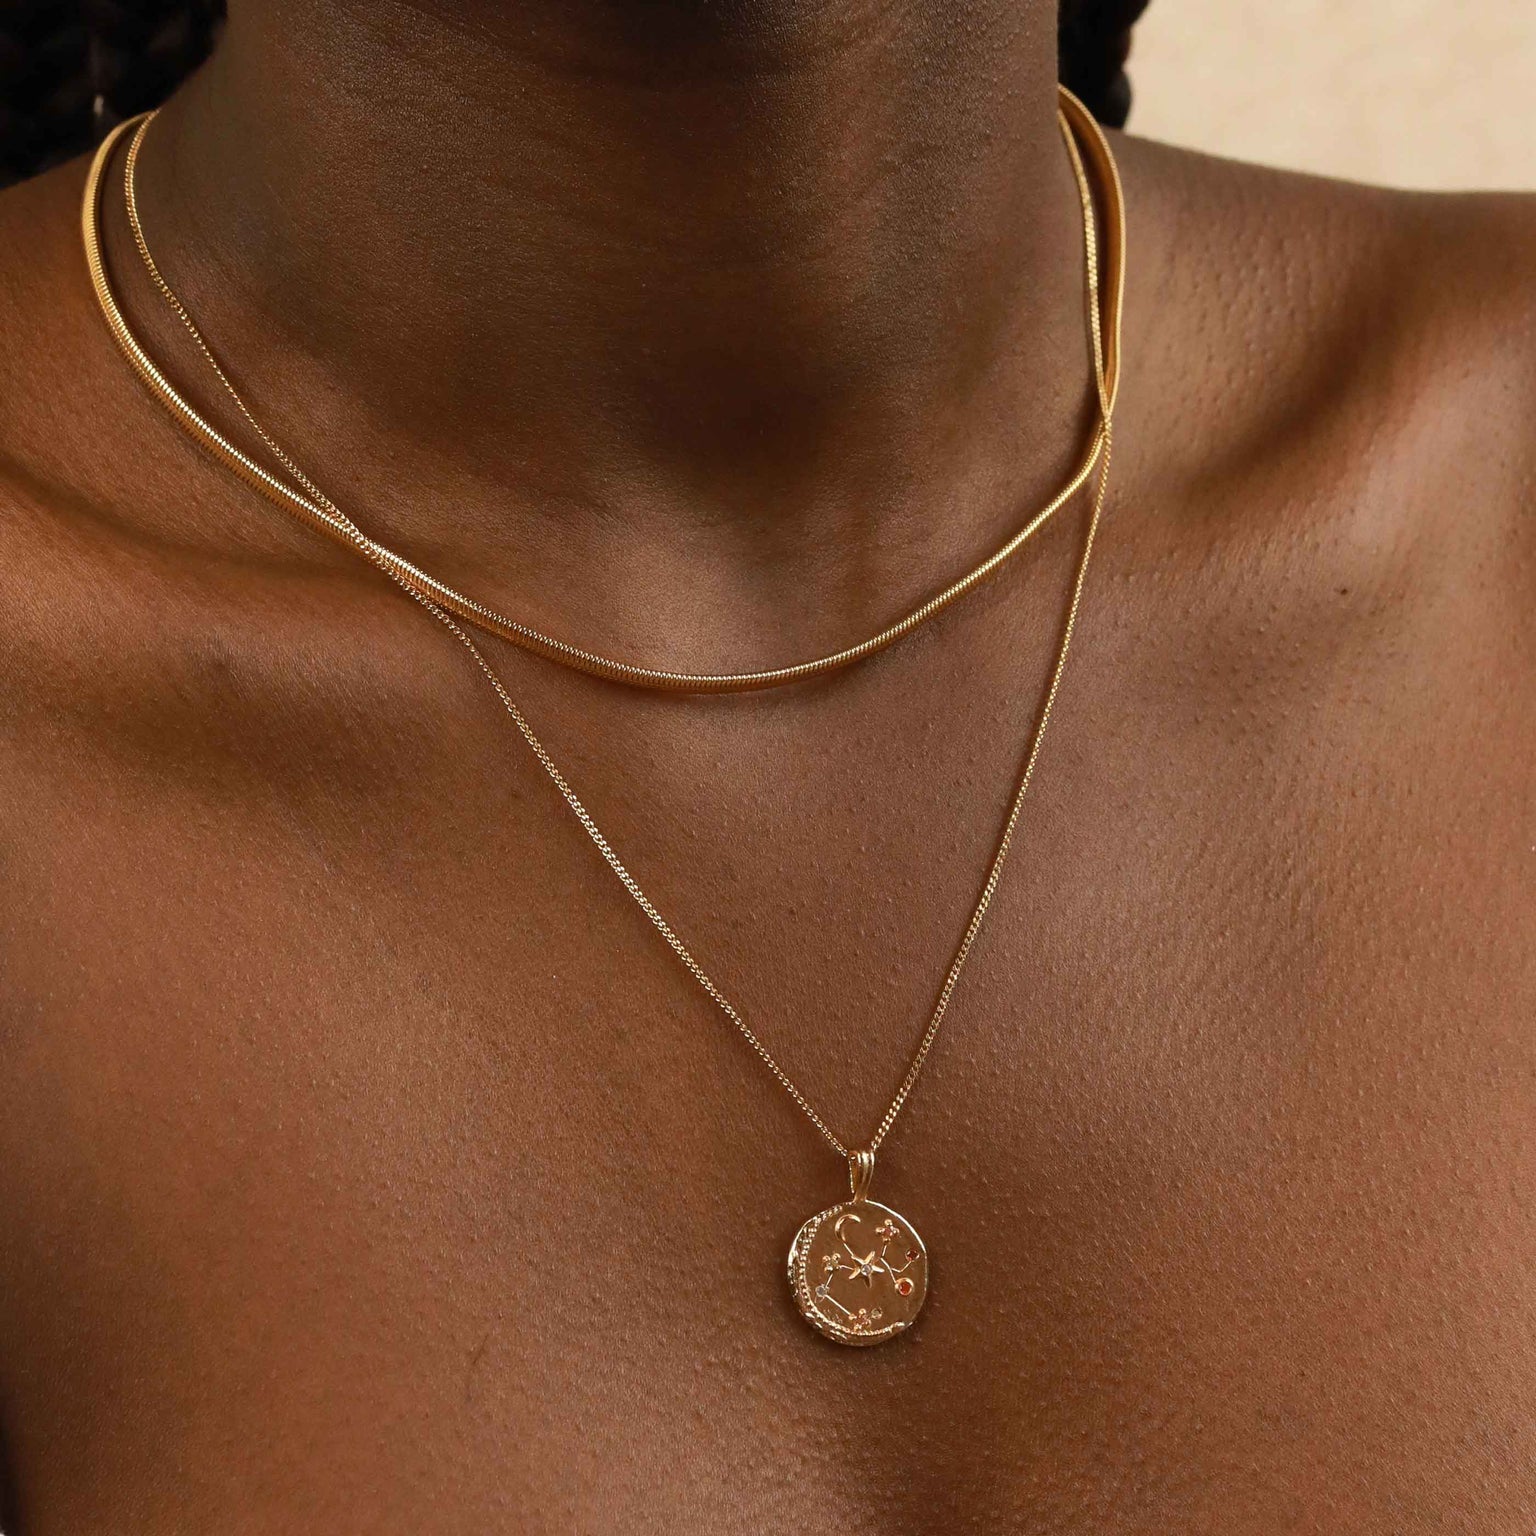 Oval Snake Chain Necklace in Gold layered with zodiac pendant necklace